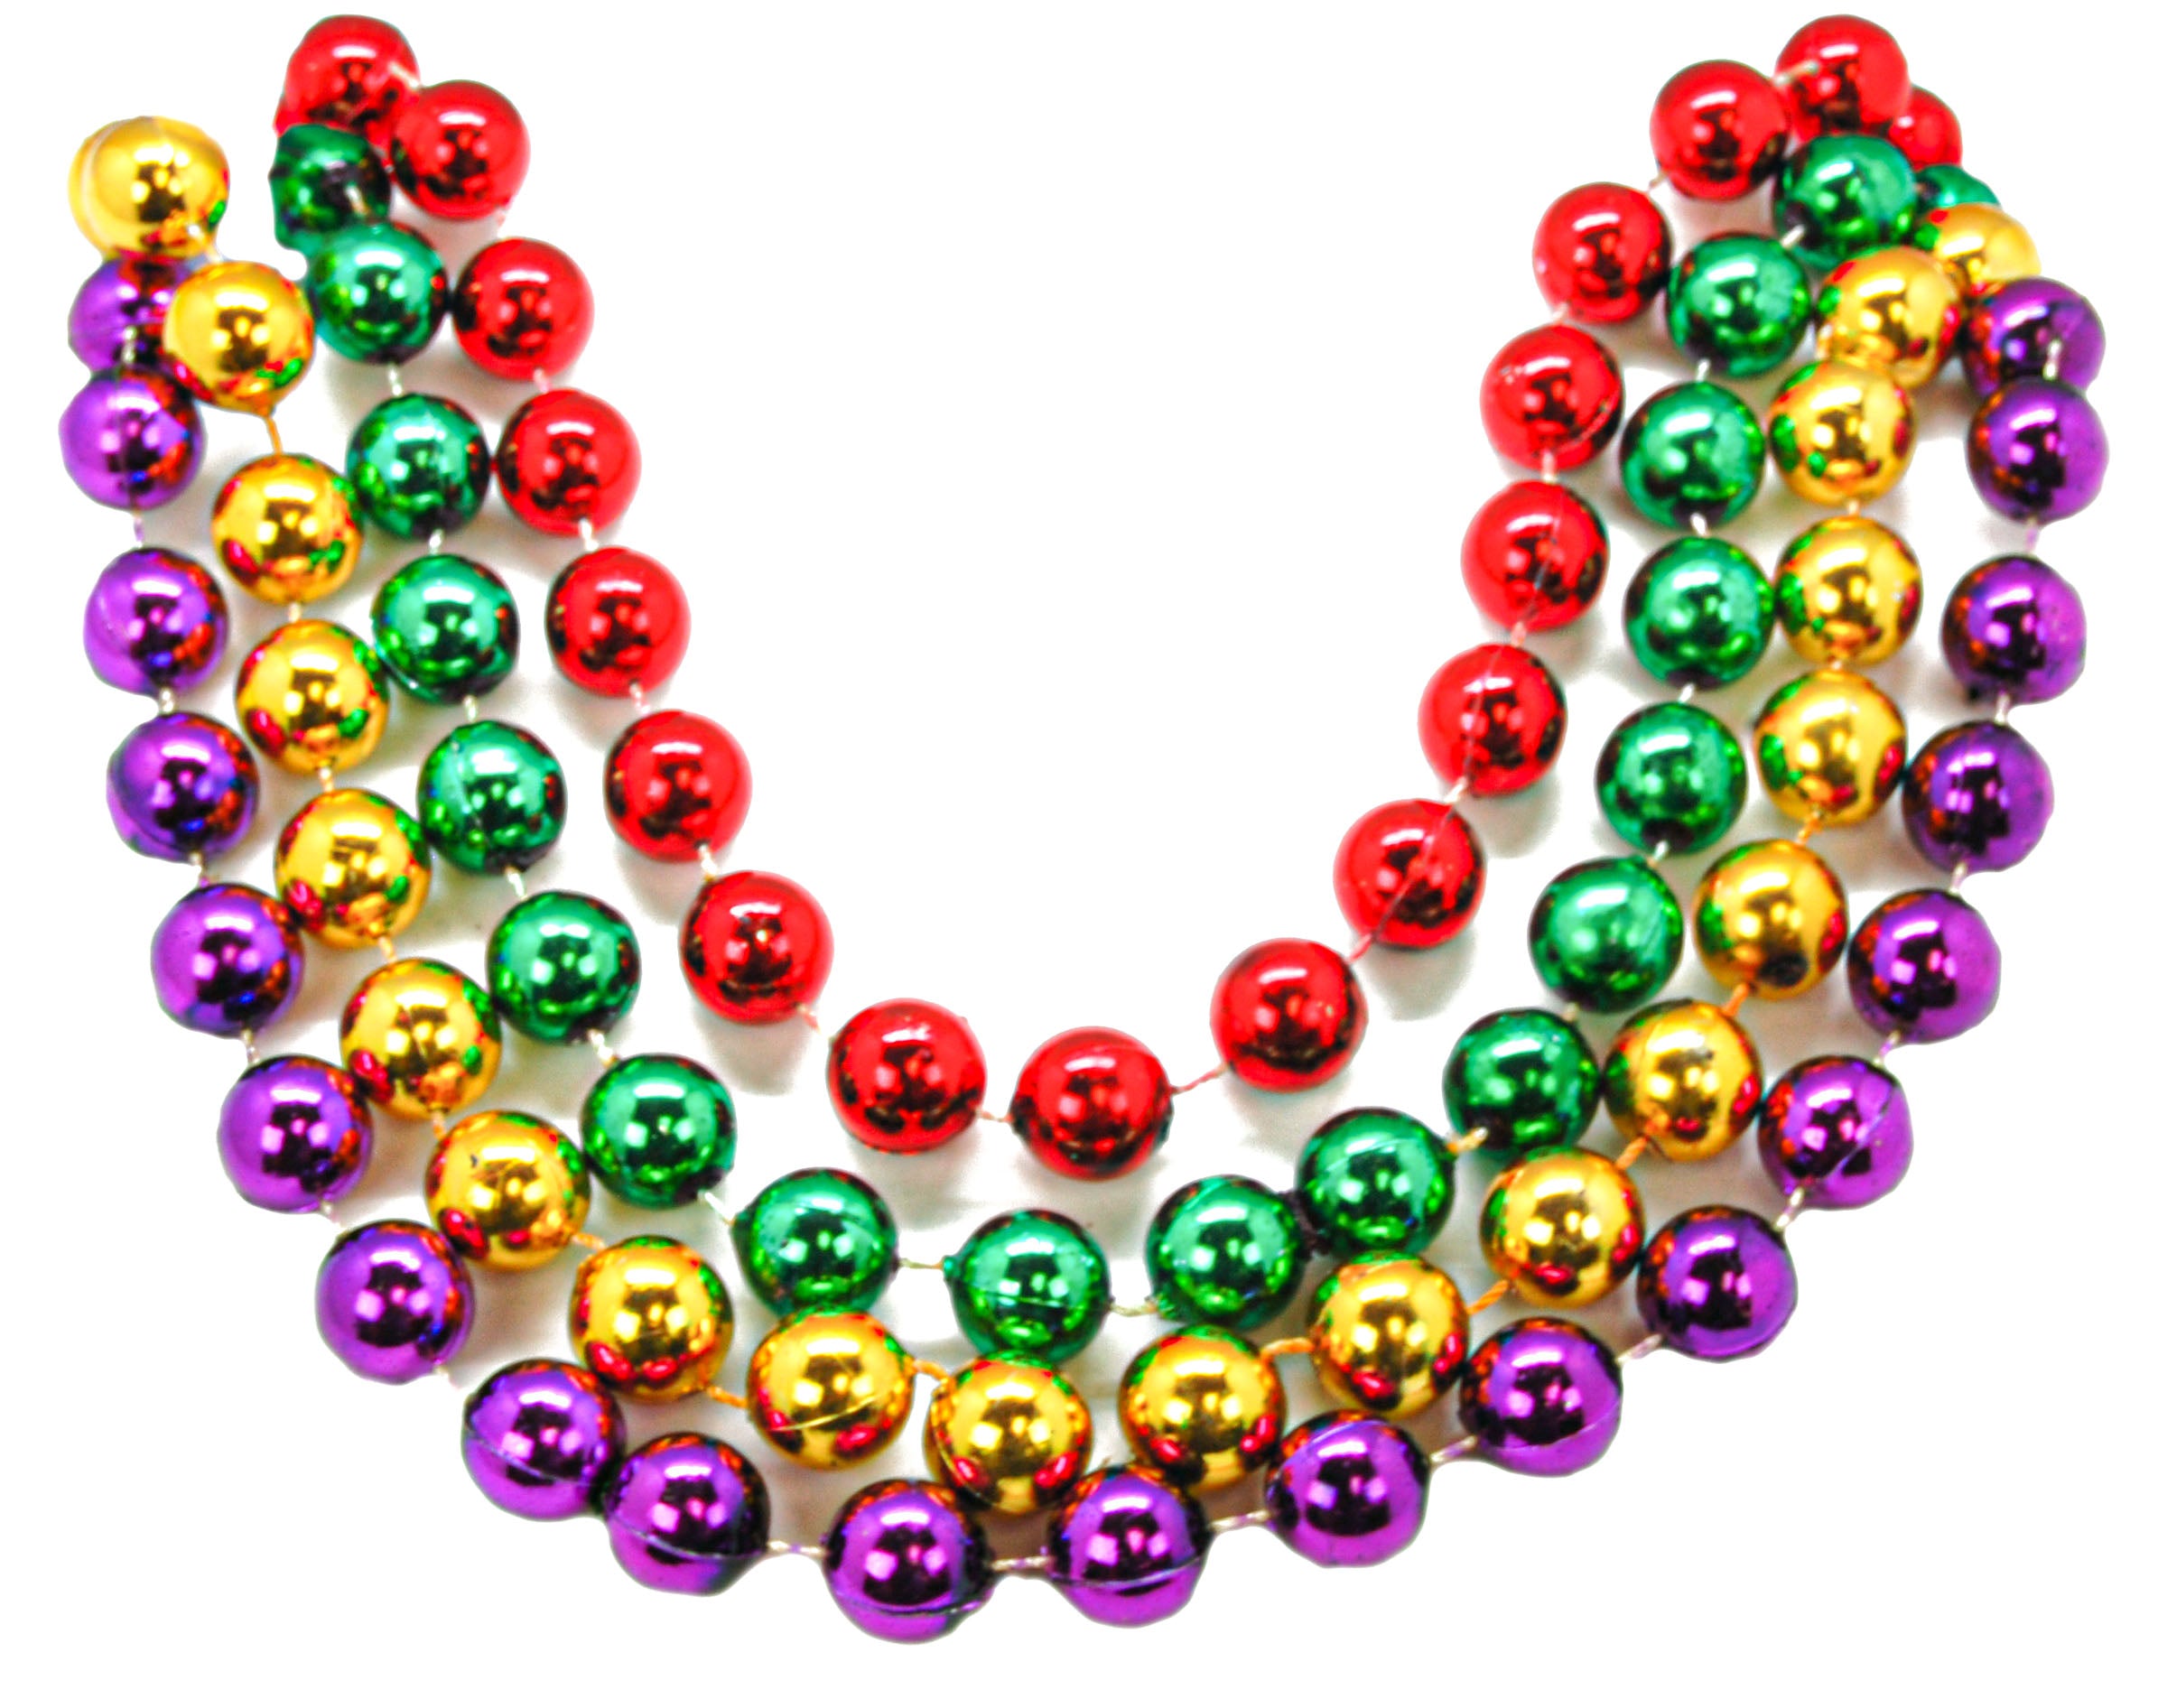 72 18mm Round Beads Purple, Green, and Gold